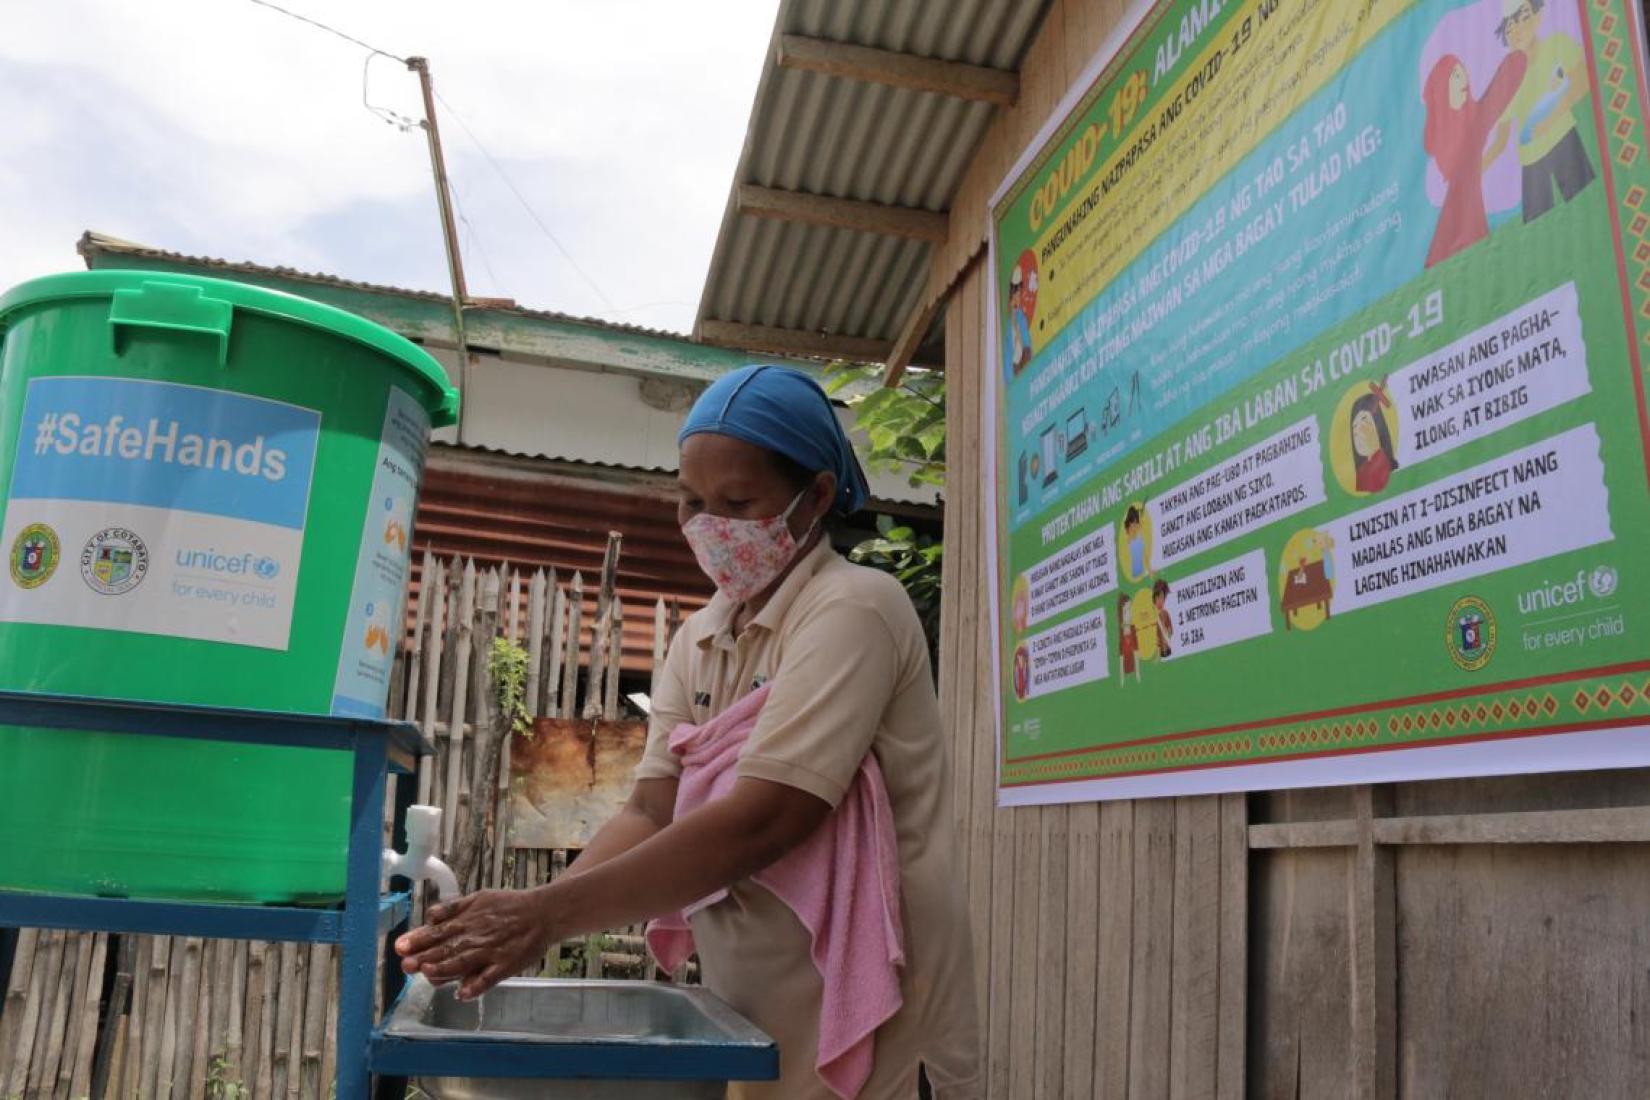 Handwashing stations in various areas such as quarantine checkpoints